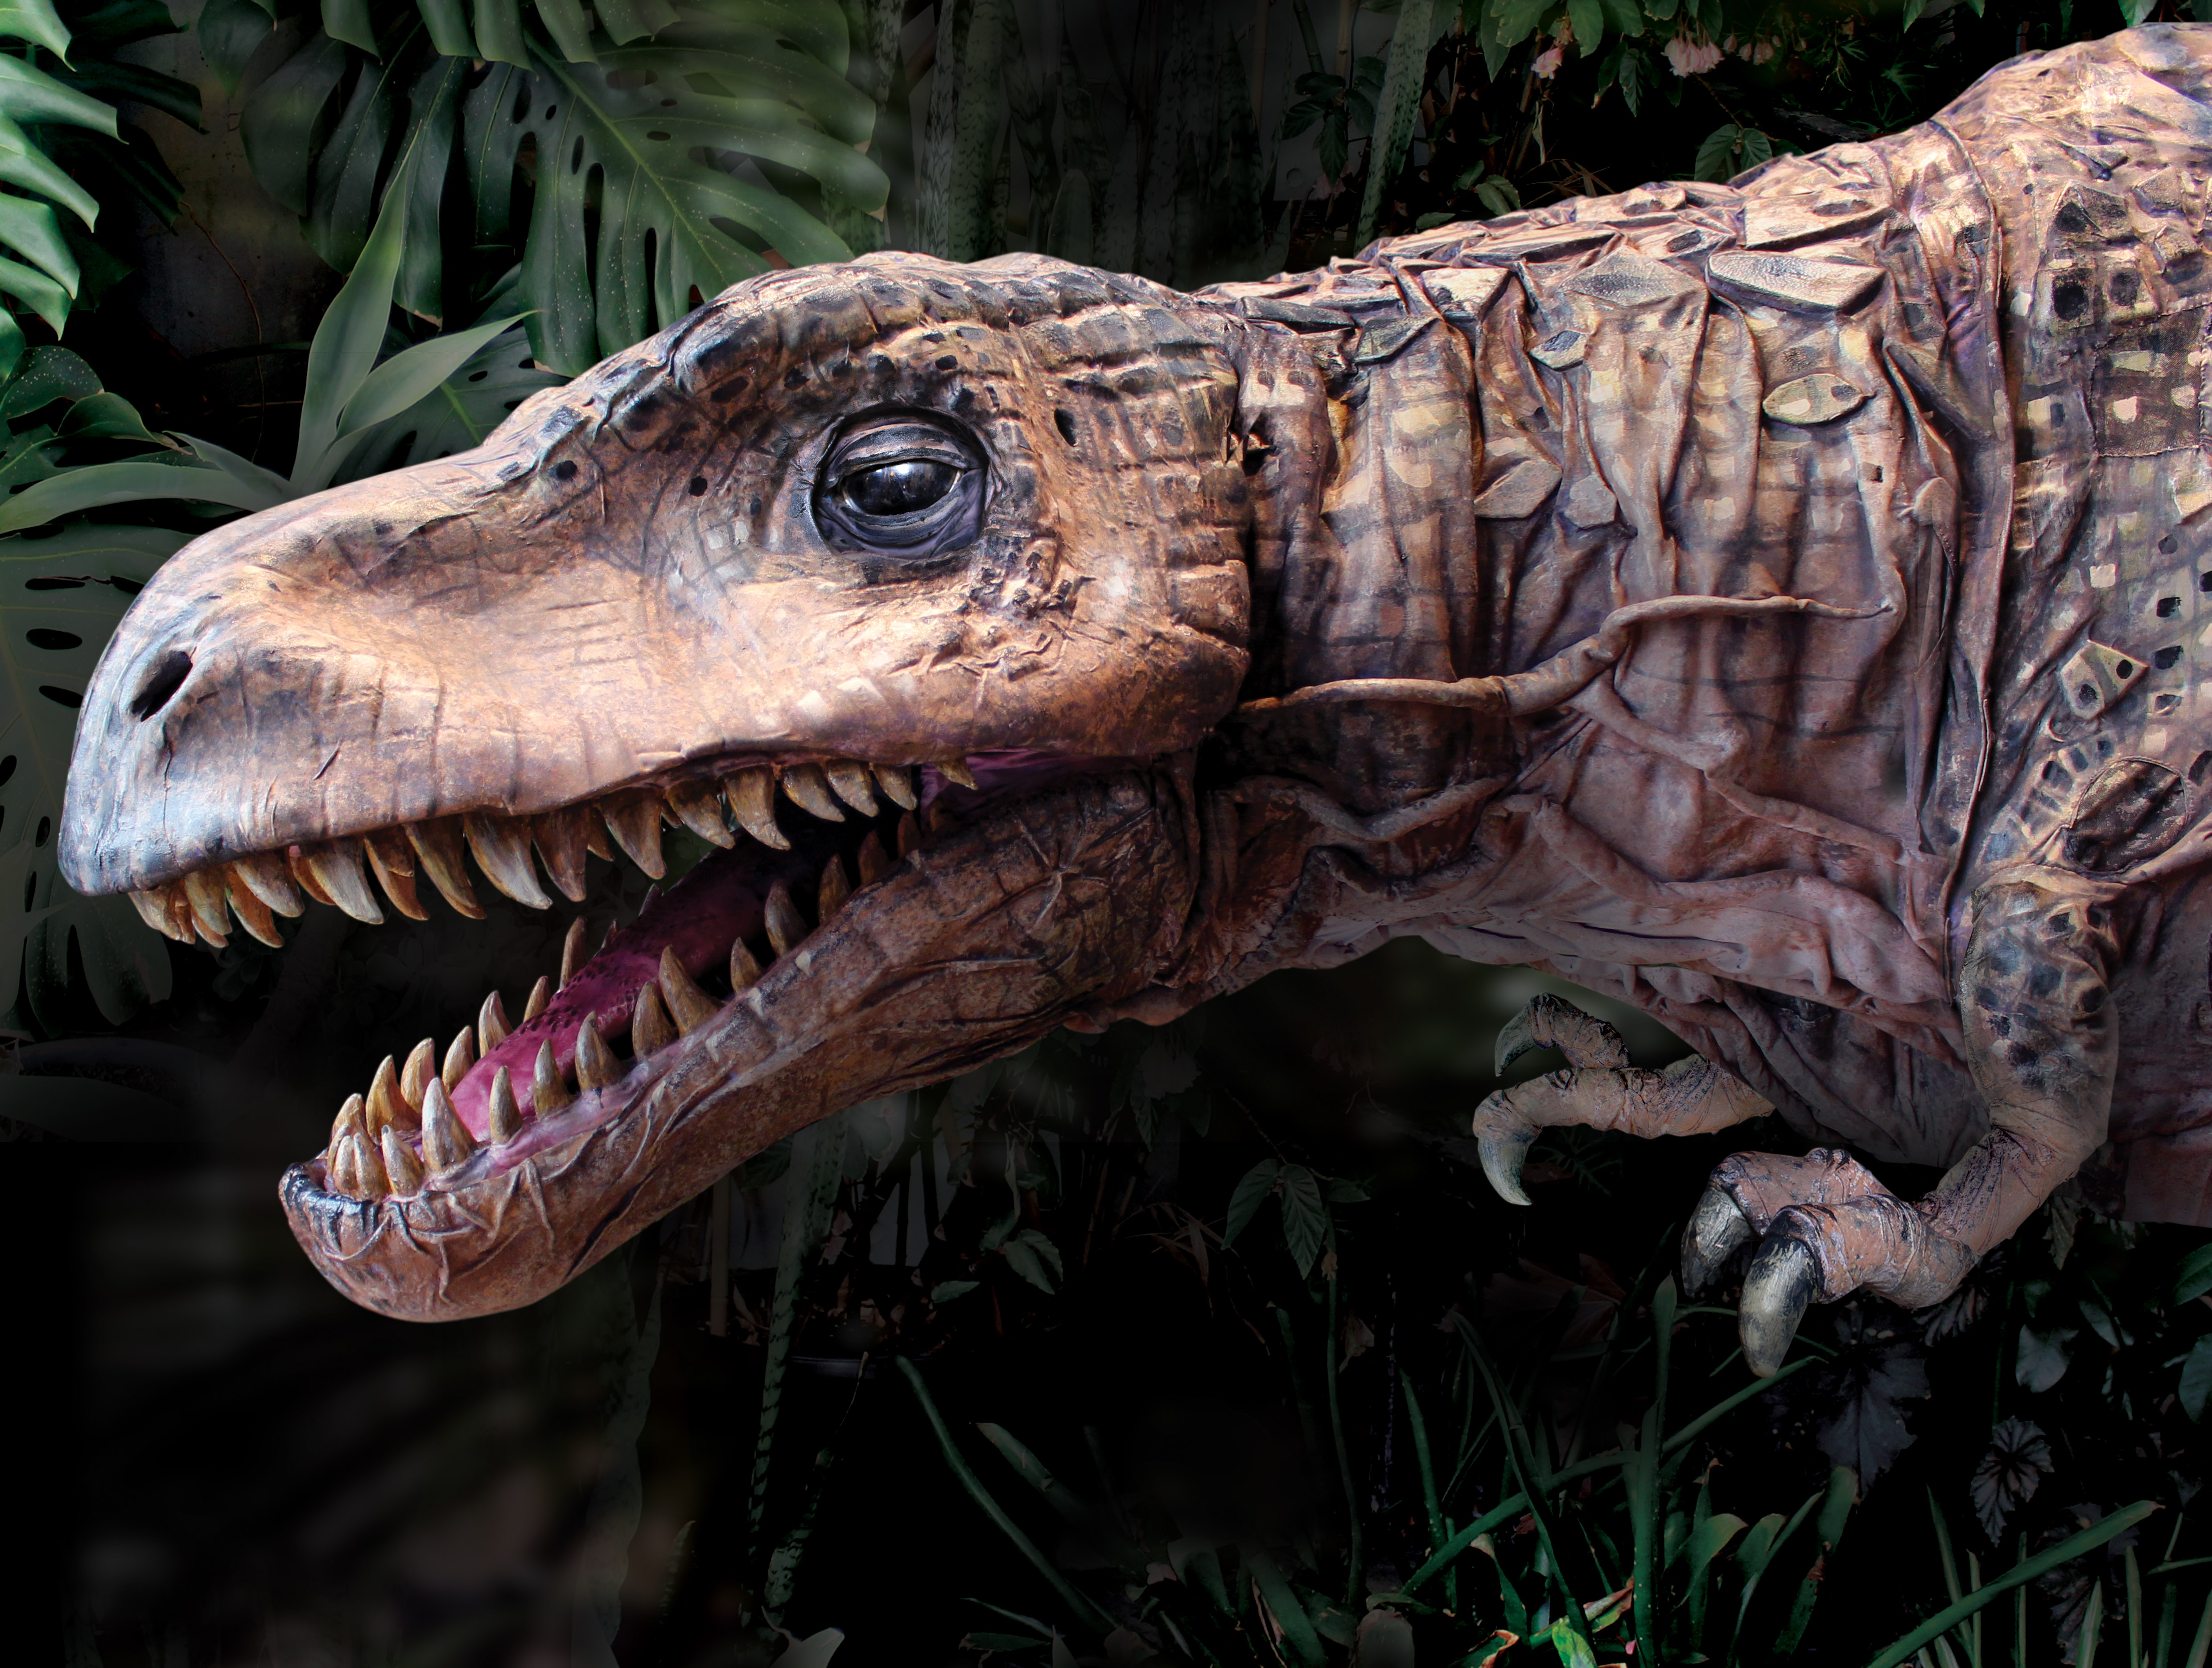 Prince - a baby animatronic T Rex at Field Station: Dinosaurs